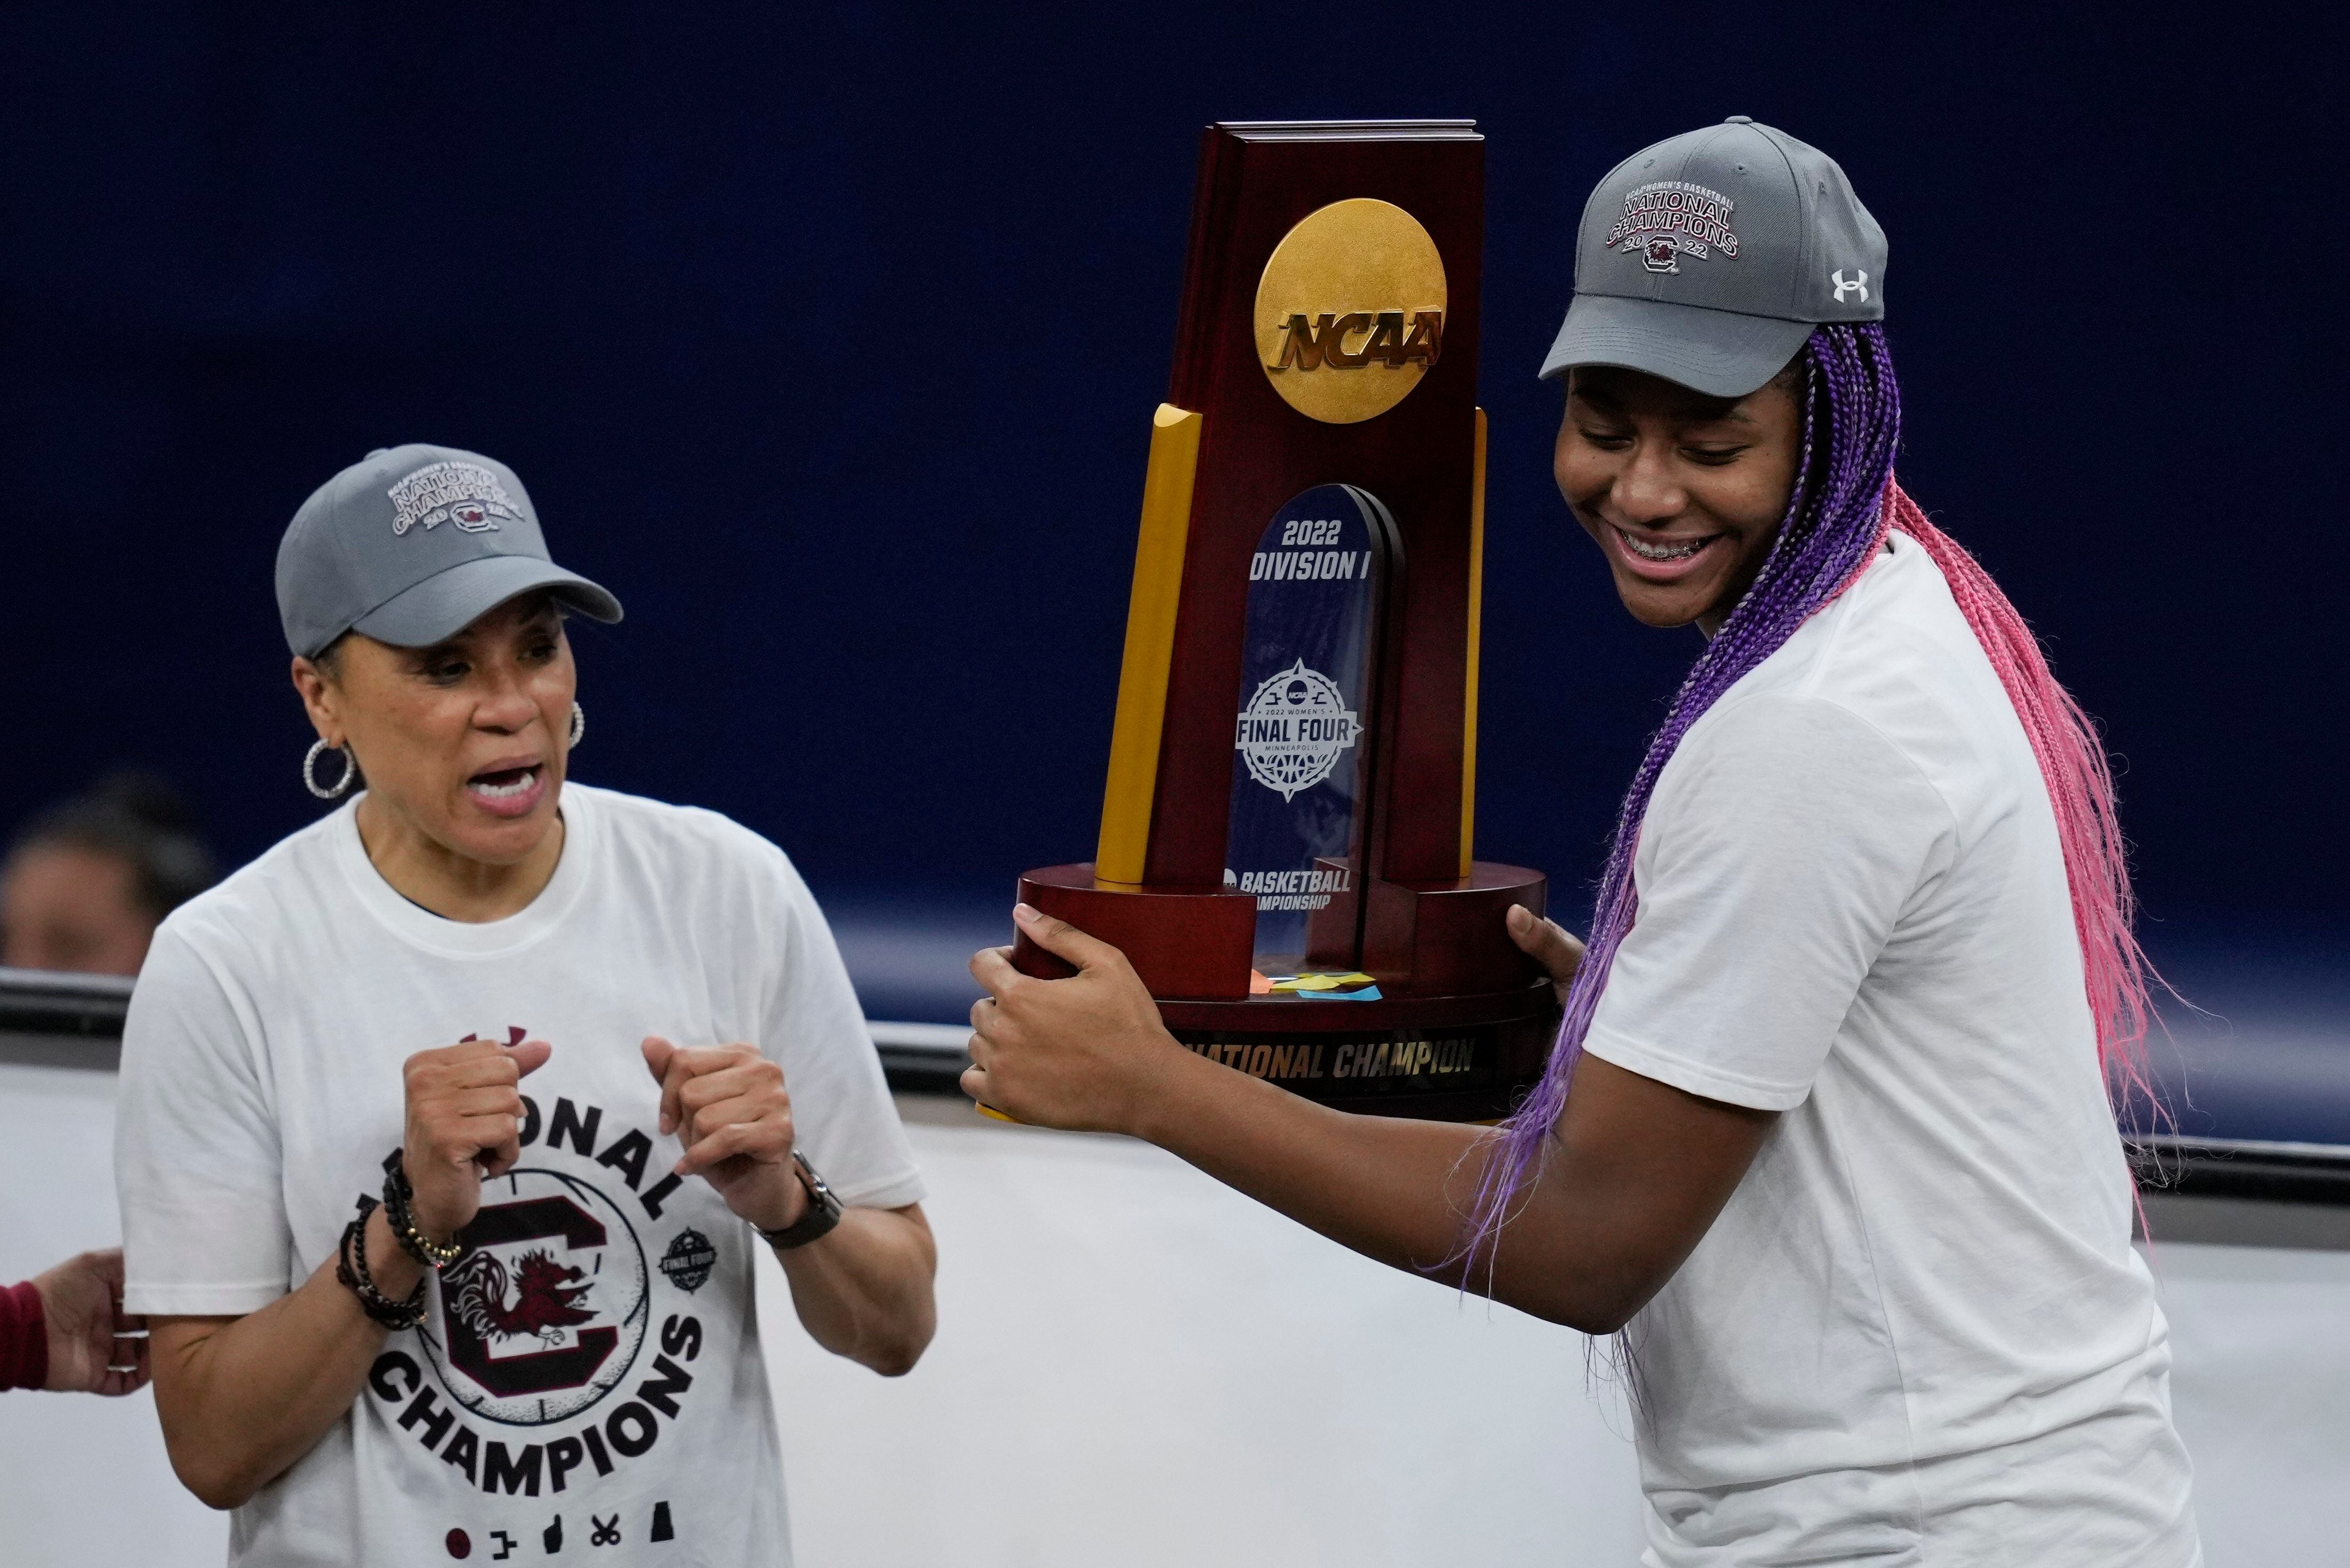 Gamecocks' Dawn Staley lobbies for national title, eager to pursue